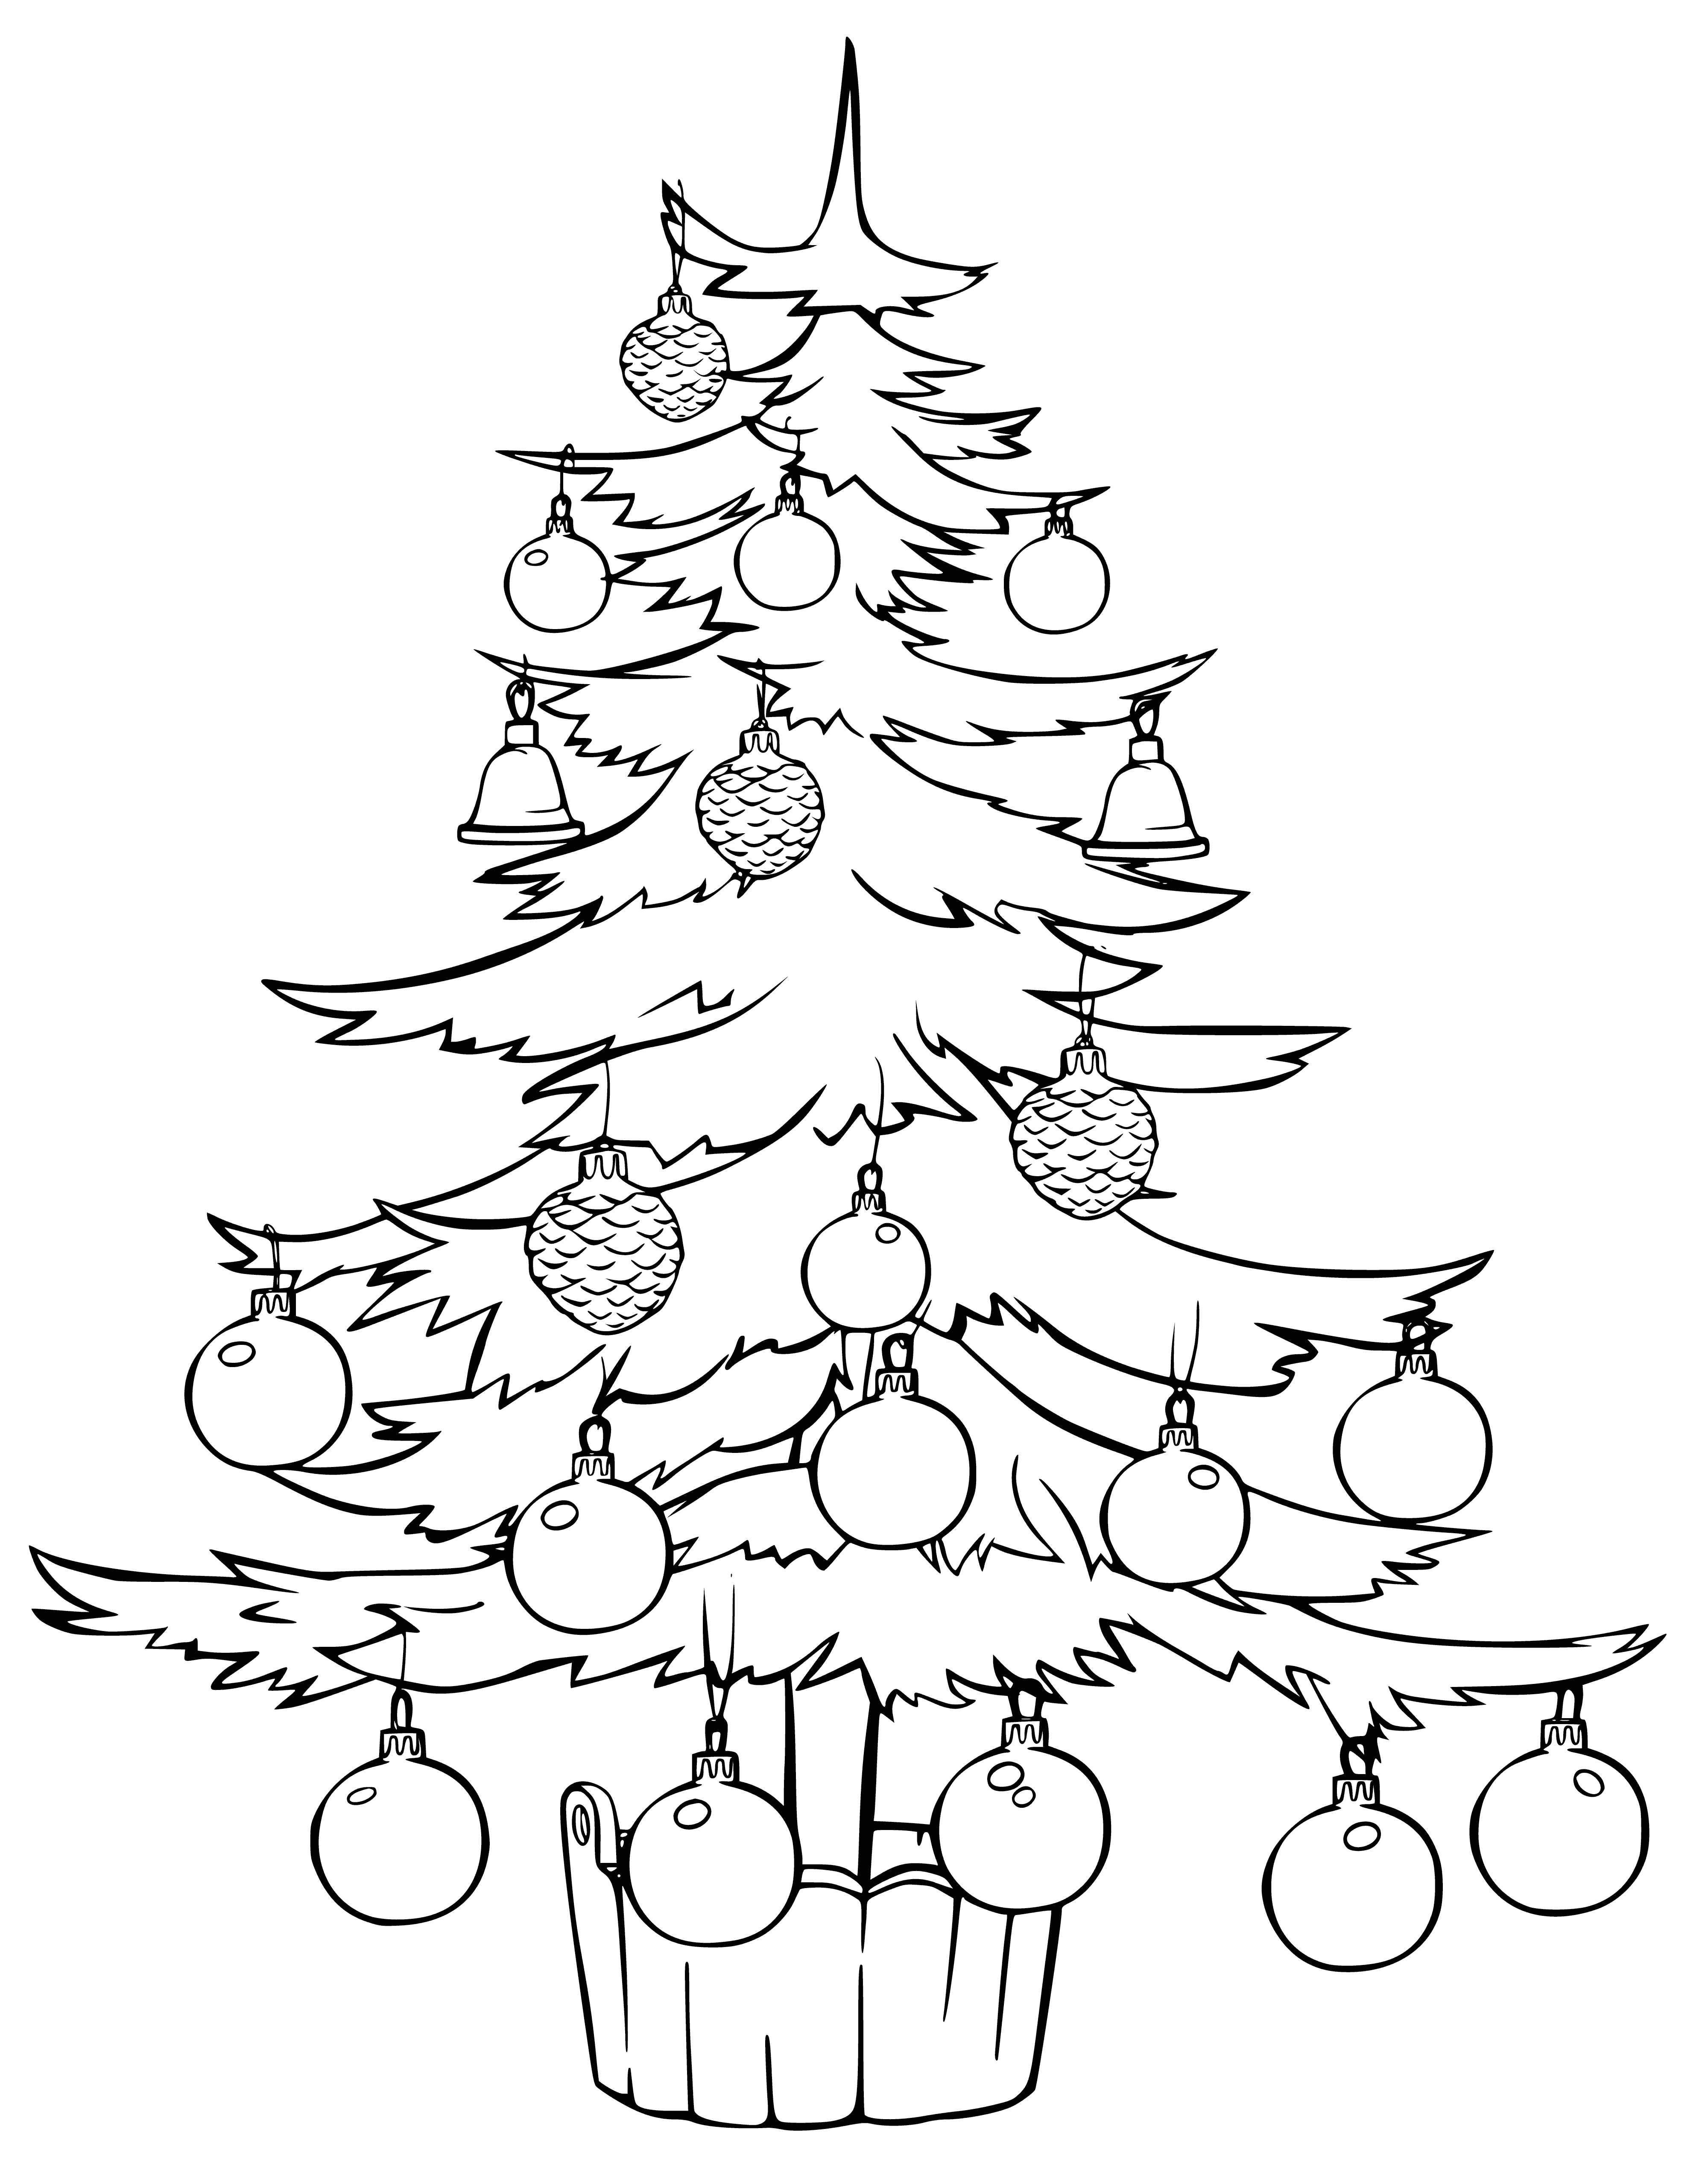 coloring page: Festive holiday scene: decorated tree w/lights, ornaments, & star on top, surrounded by gifts.